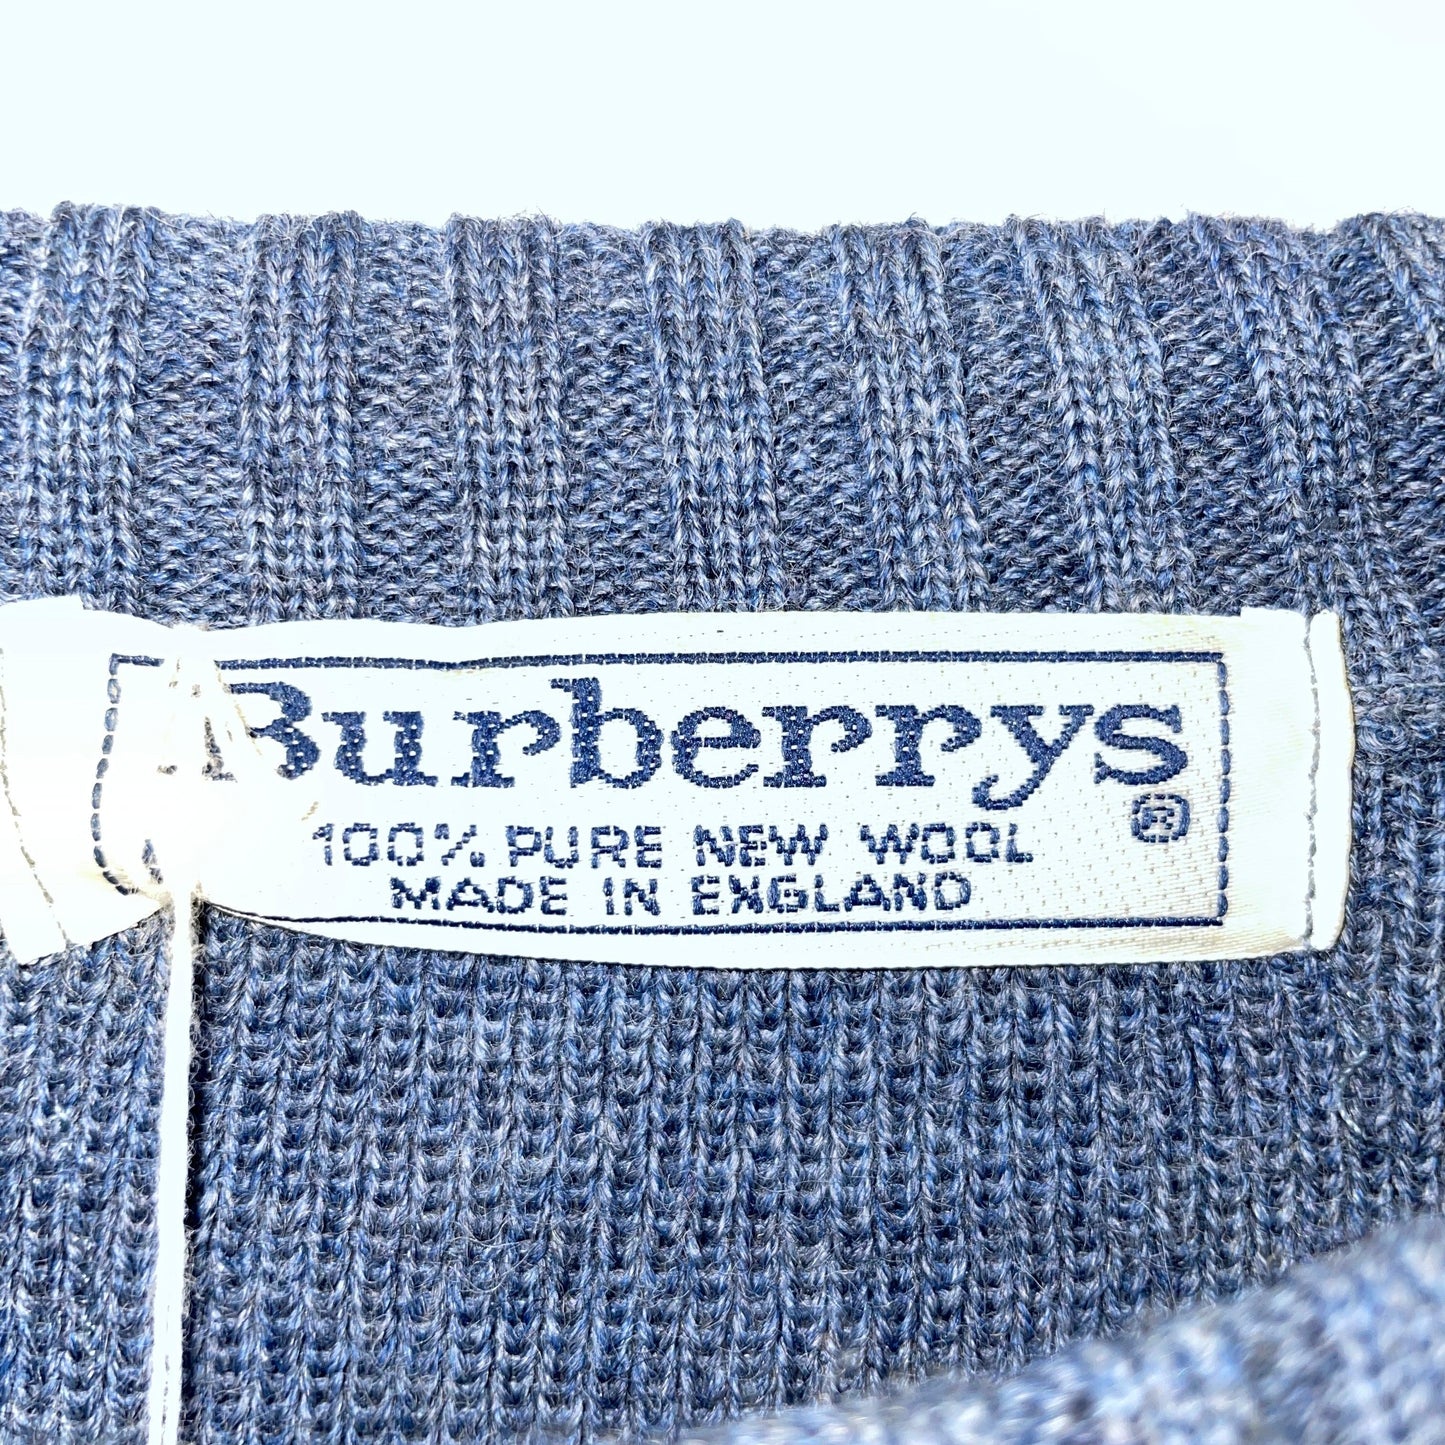 burberrys knit leather switching burberry burberry